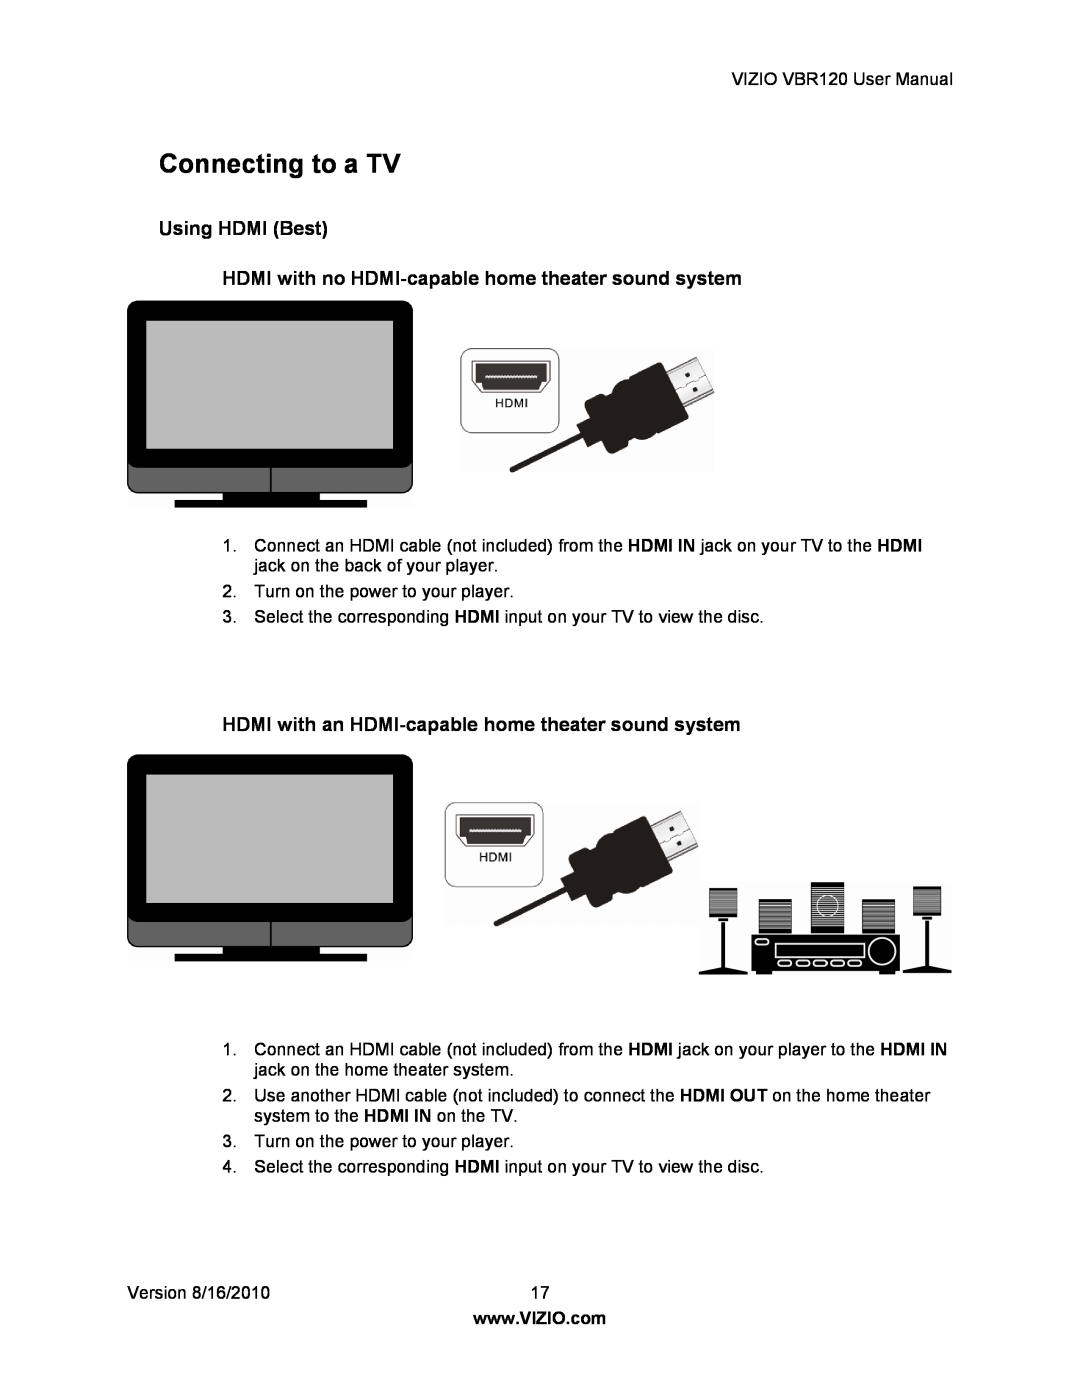 Vizio VBR 120 user manual Connecting to a TV, Using HDMI Best HDMI with no HDMI-capable home theater sound system 